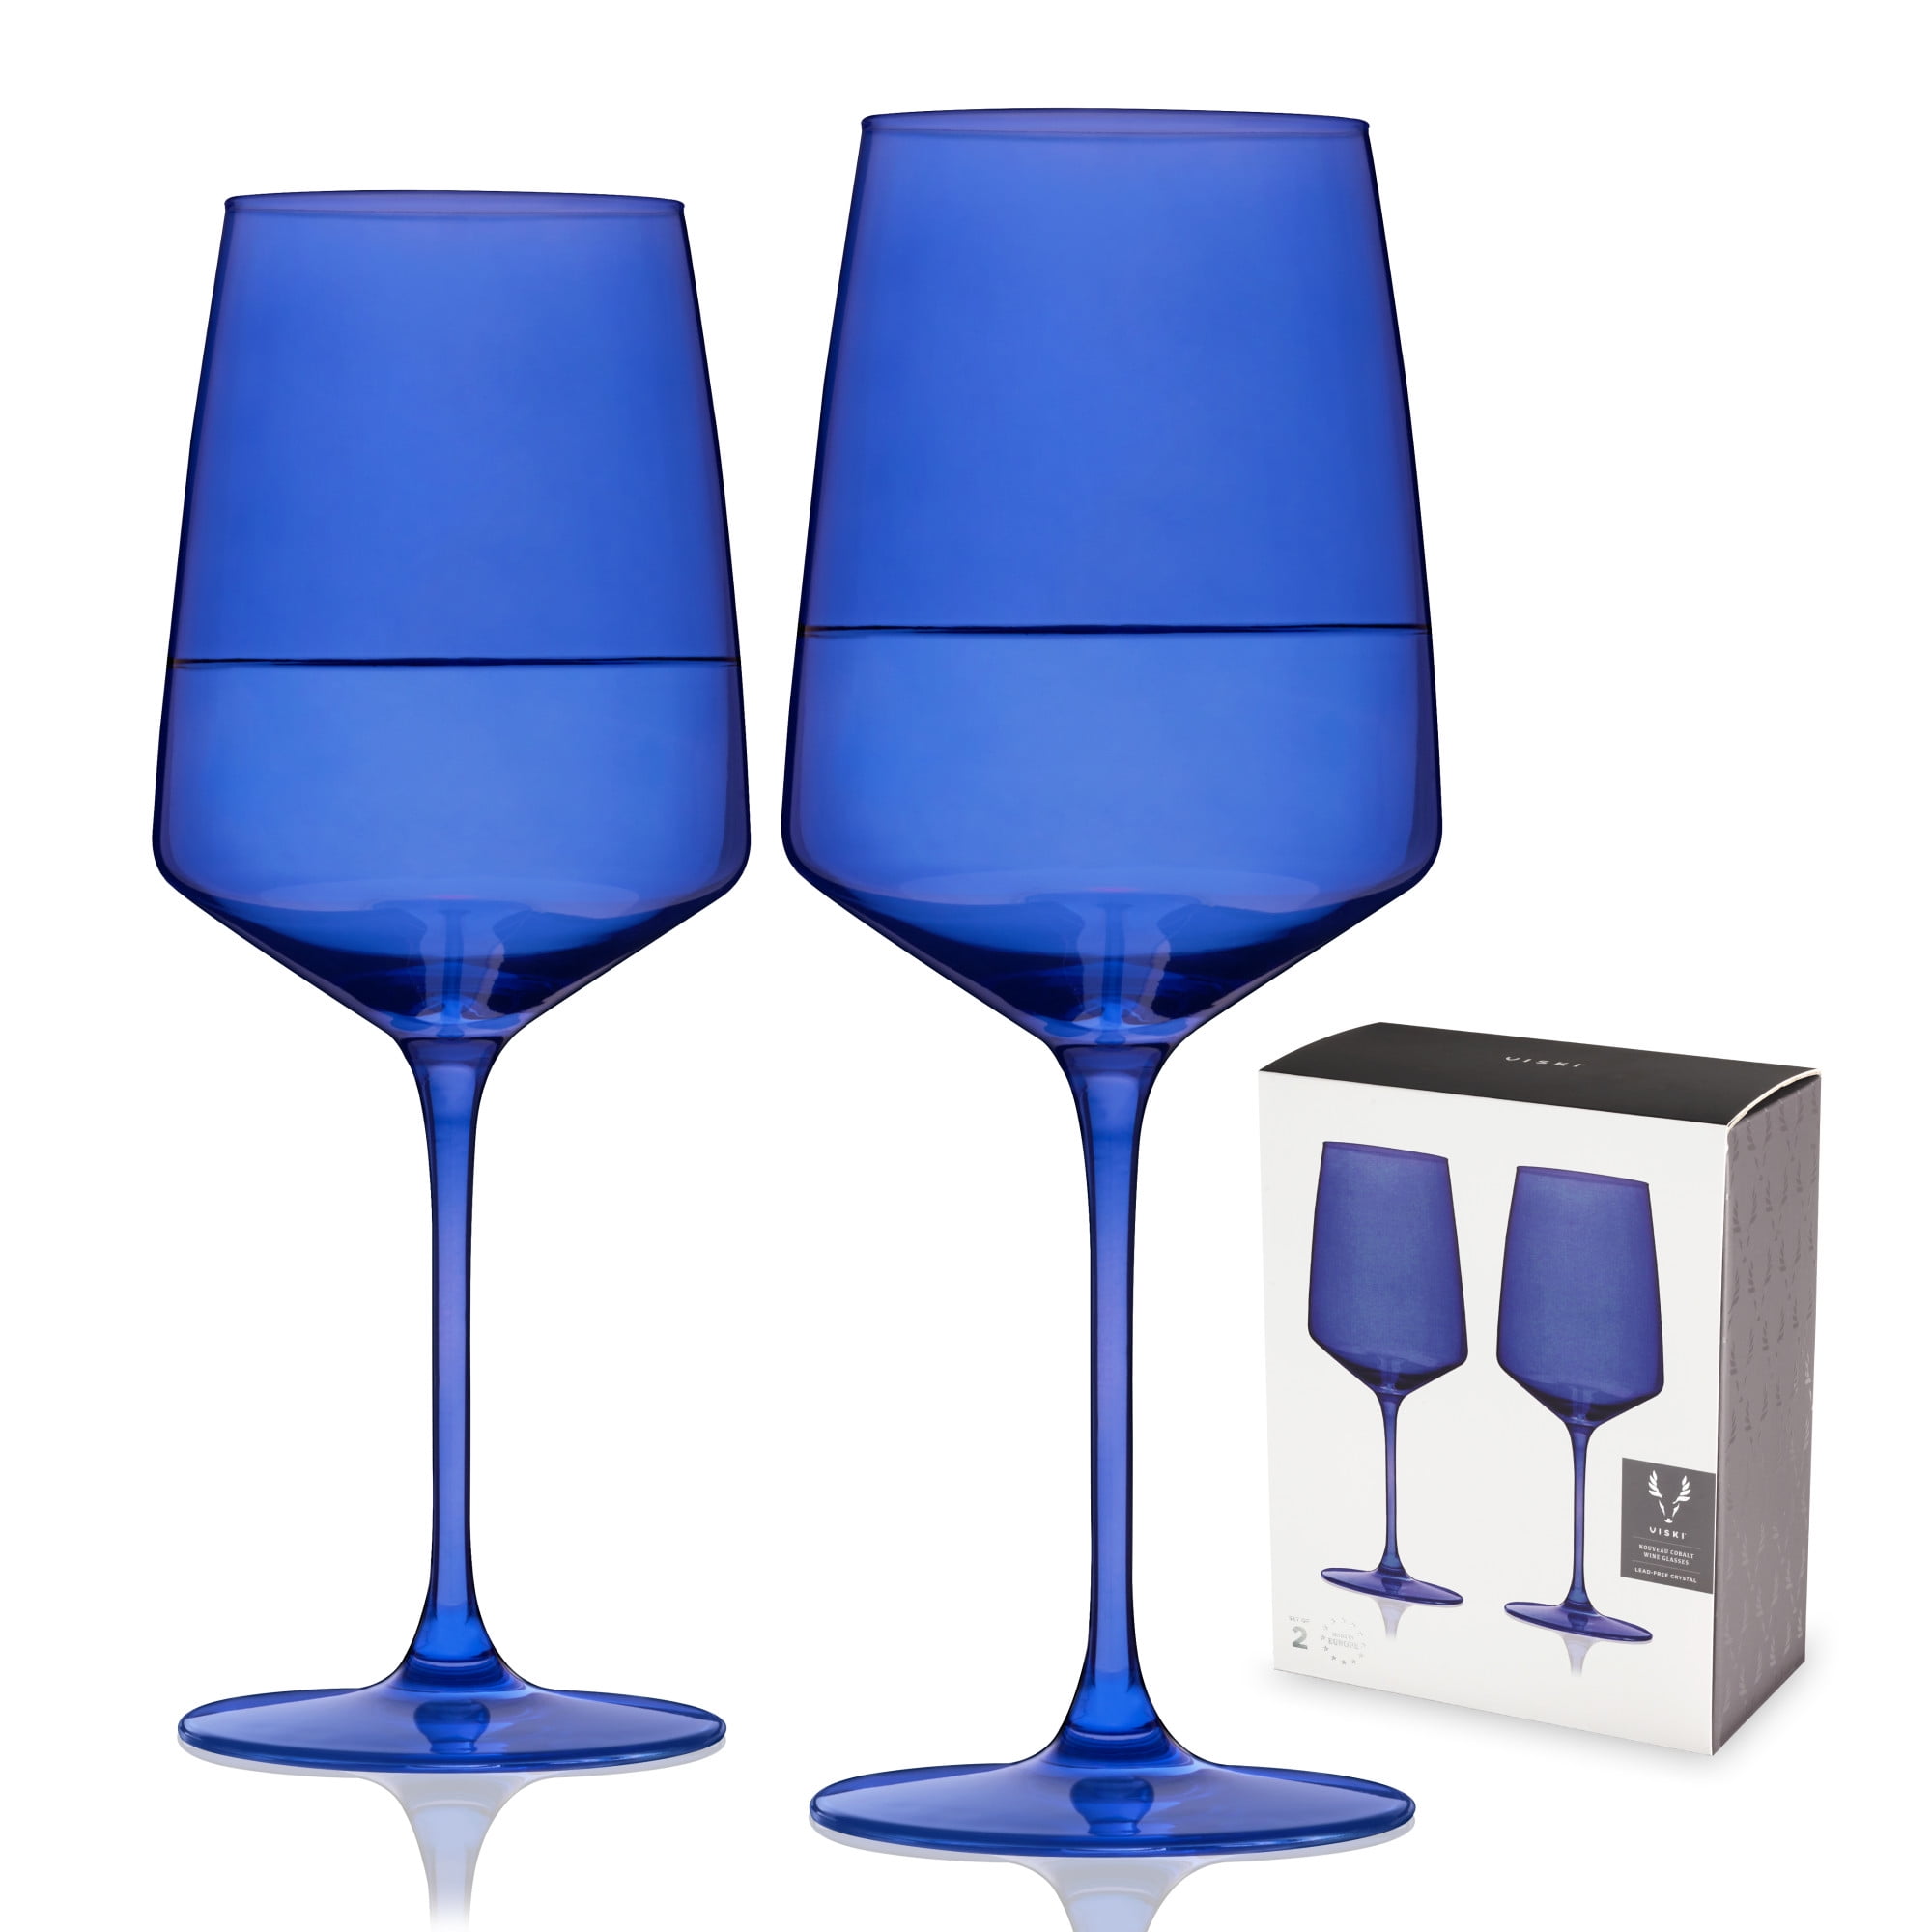 comfit Blue Wine Glasses Set Of 6 - Crystal Colorful Wine Glasses With Long  Stem and Thin Rim,Wine G…See more comfit Blue Wine Glasses Set Of 6 